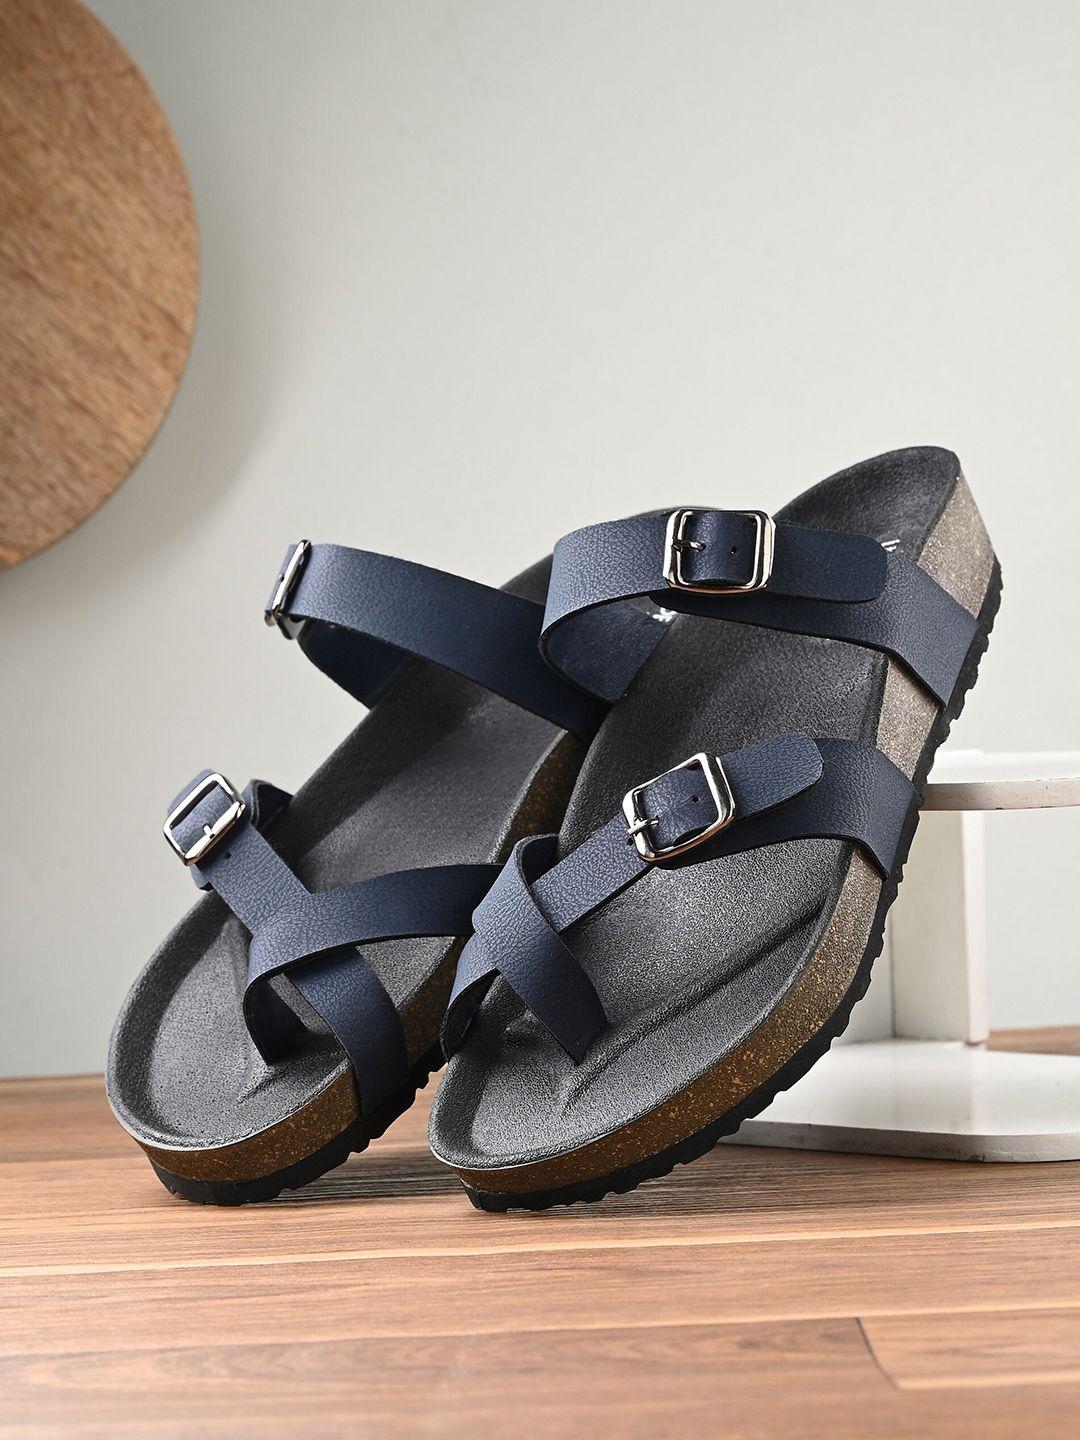 UNDERROUTE Men One Toe Two Strap Comfort Sandals With Buckle Detail